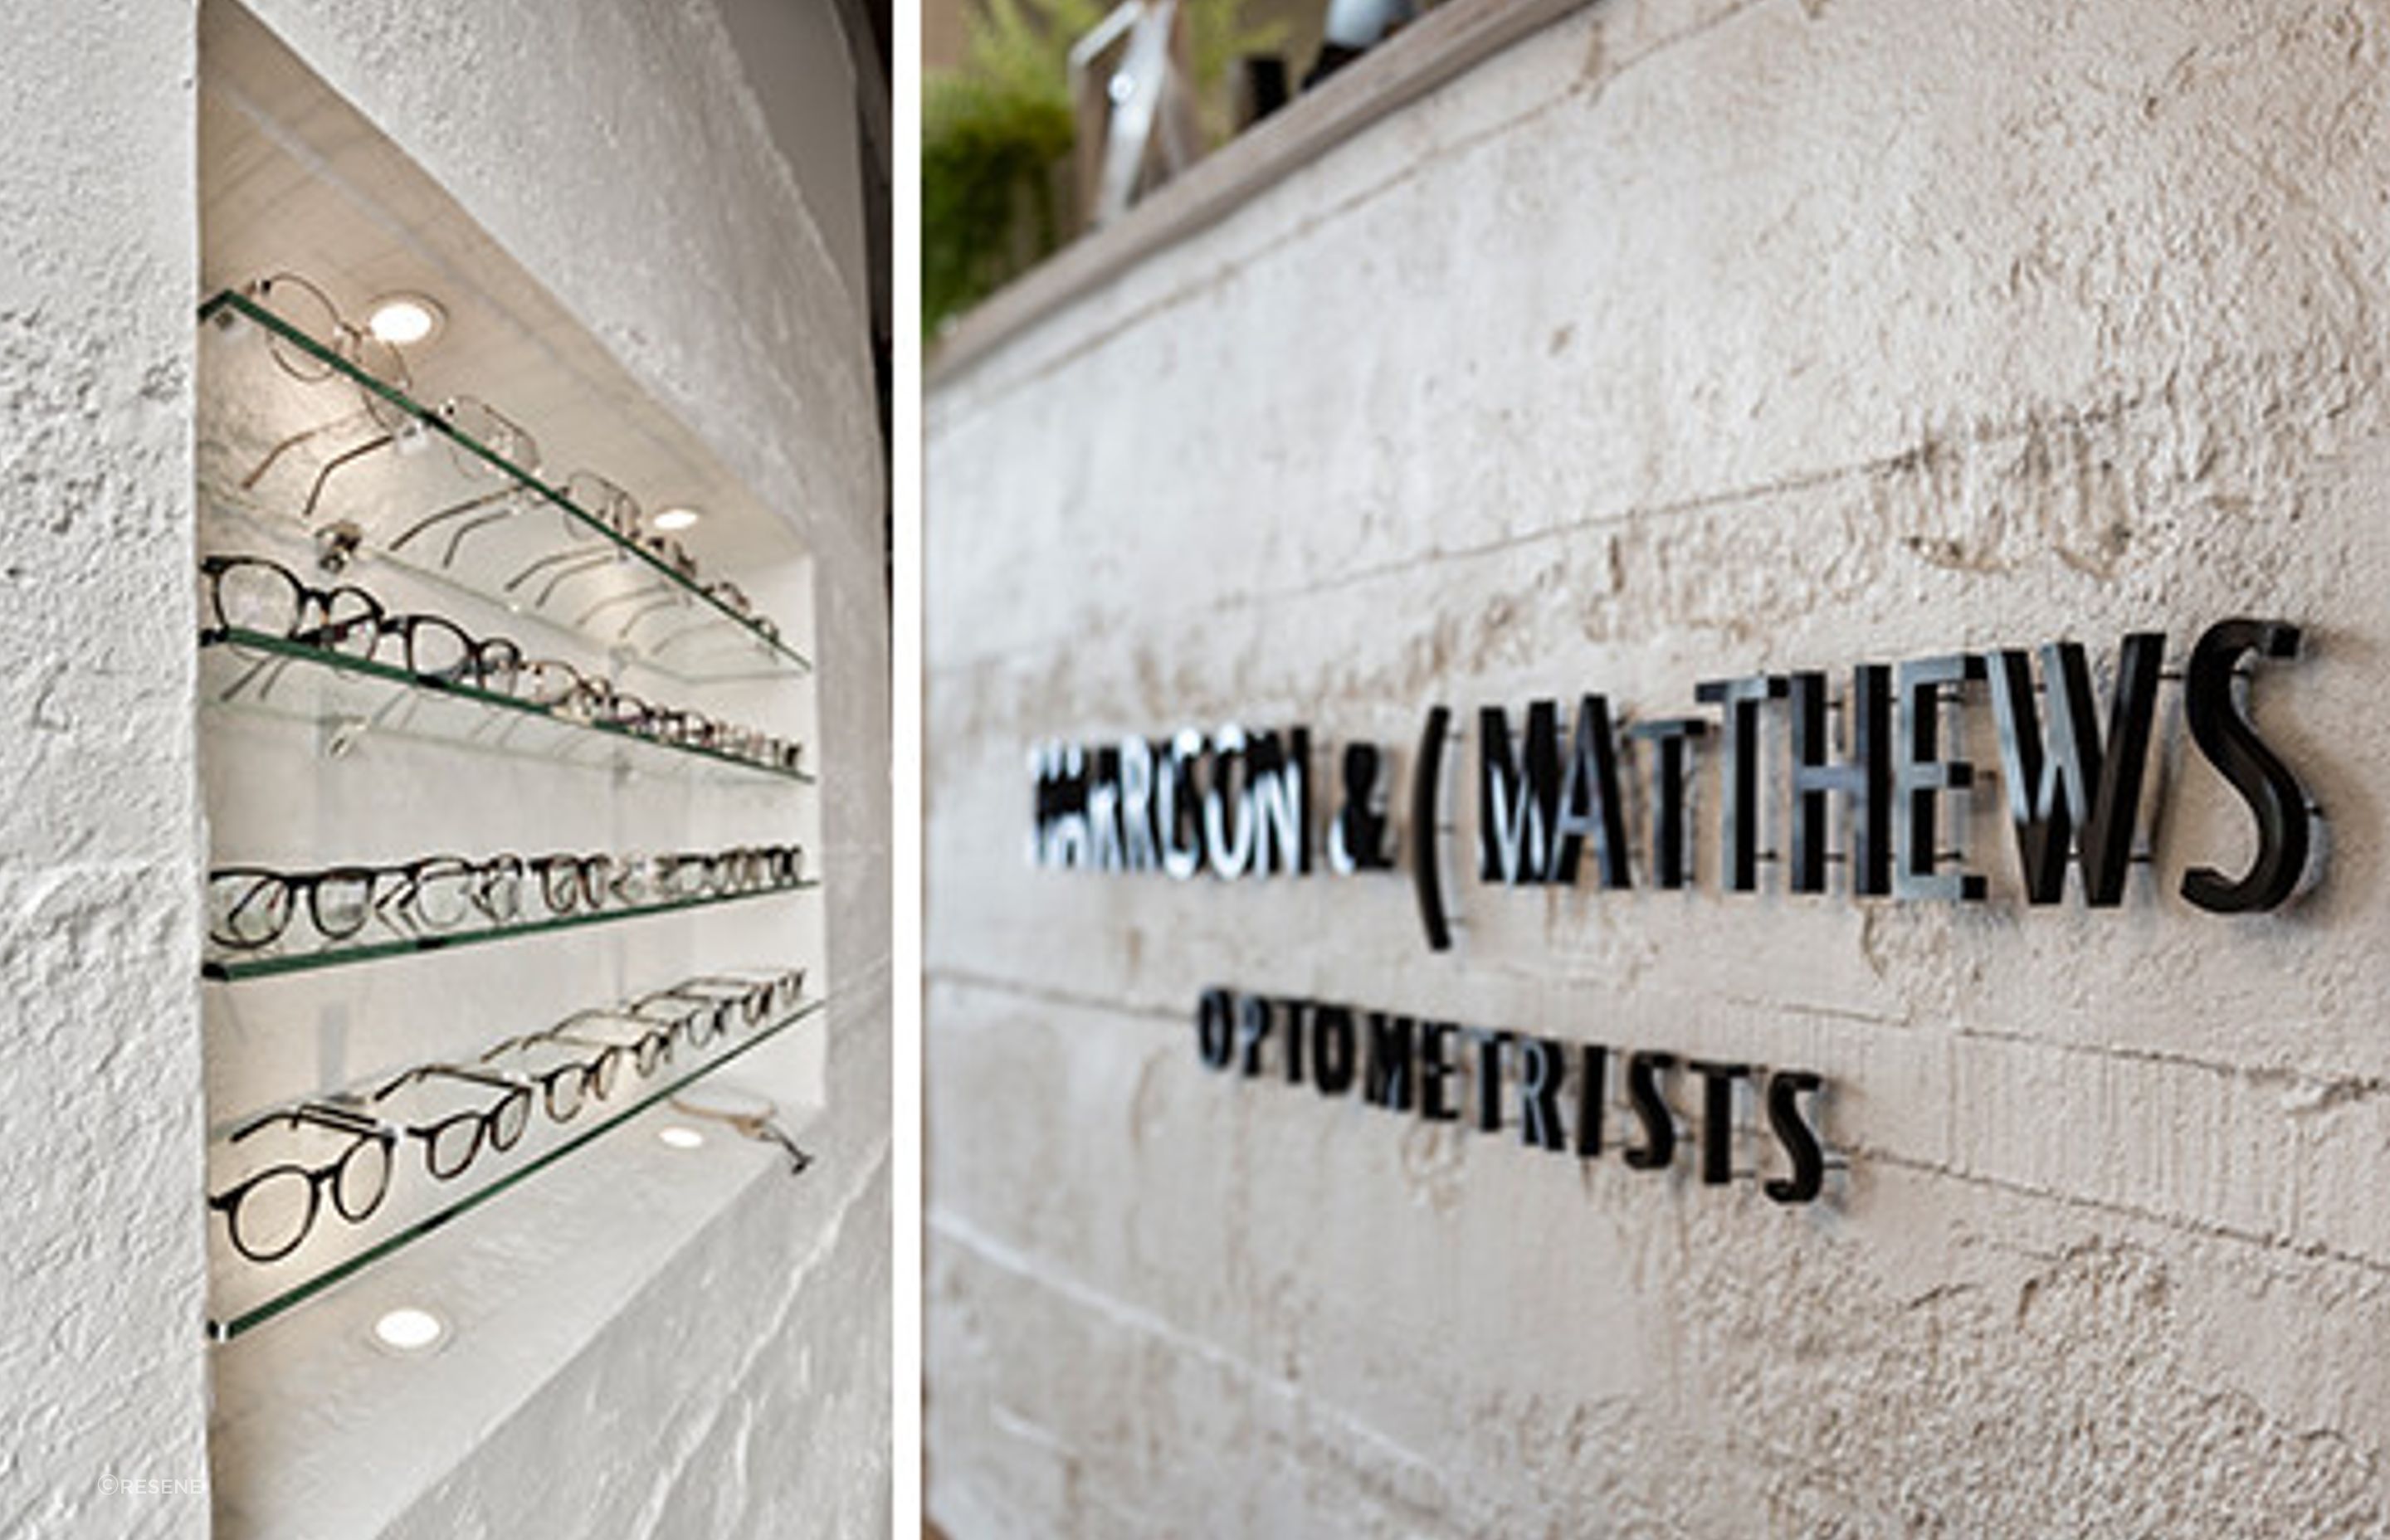 Muros Grey Roughcast Concrete wall panels were installed horizontally on walls, columns and the front counter then painted in Resene Black White at Harrison &amp; Mathews Optometrists in Ponsonby, Auckland. Design by The Fit Out Company.